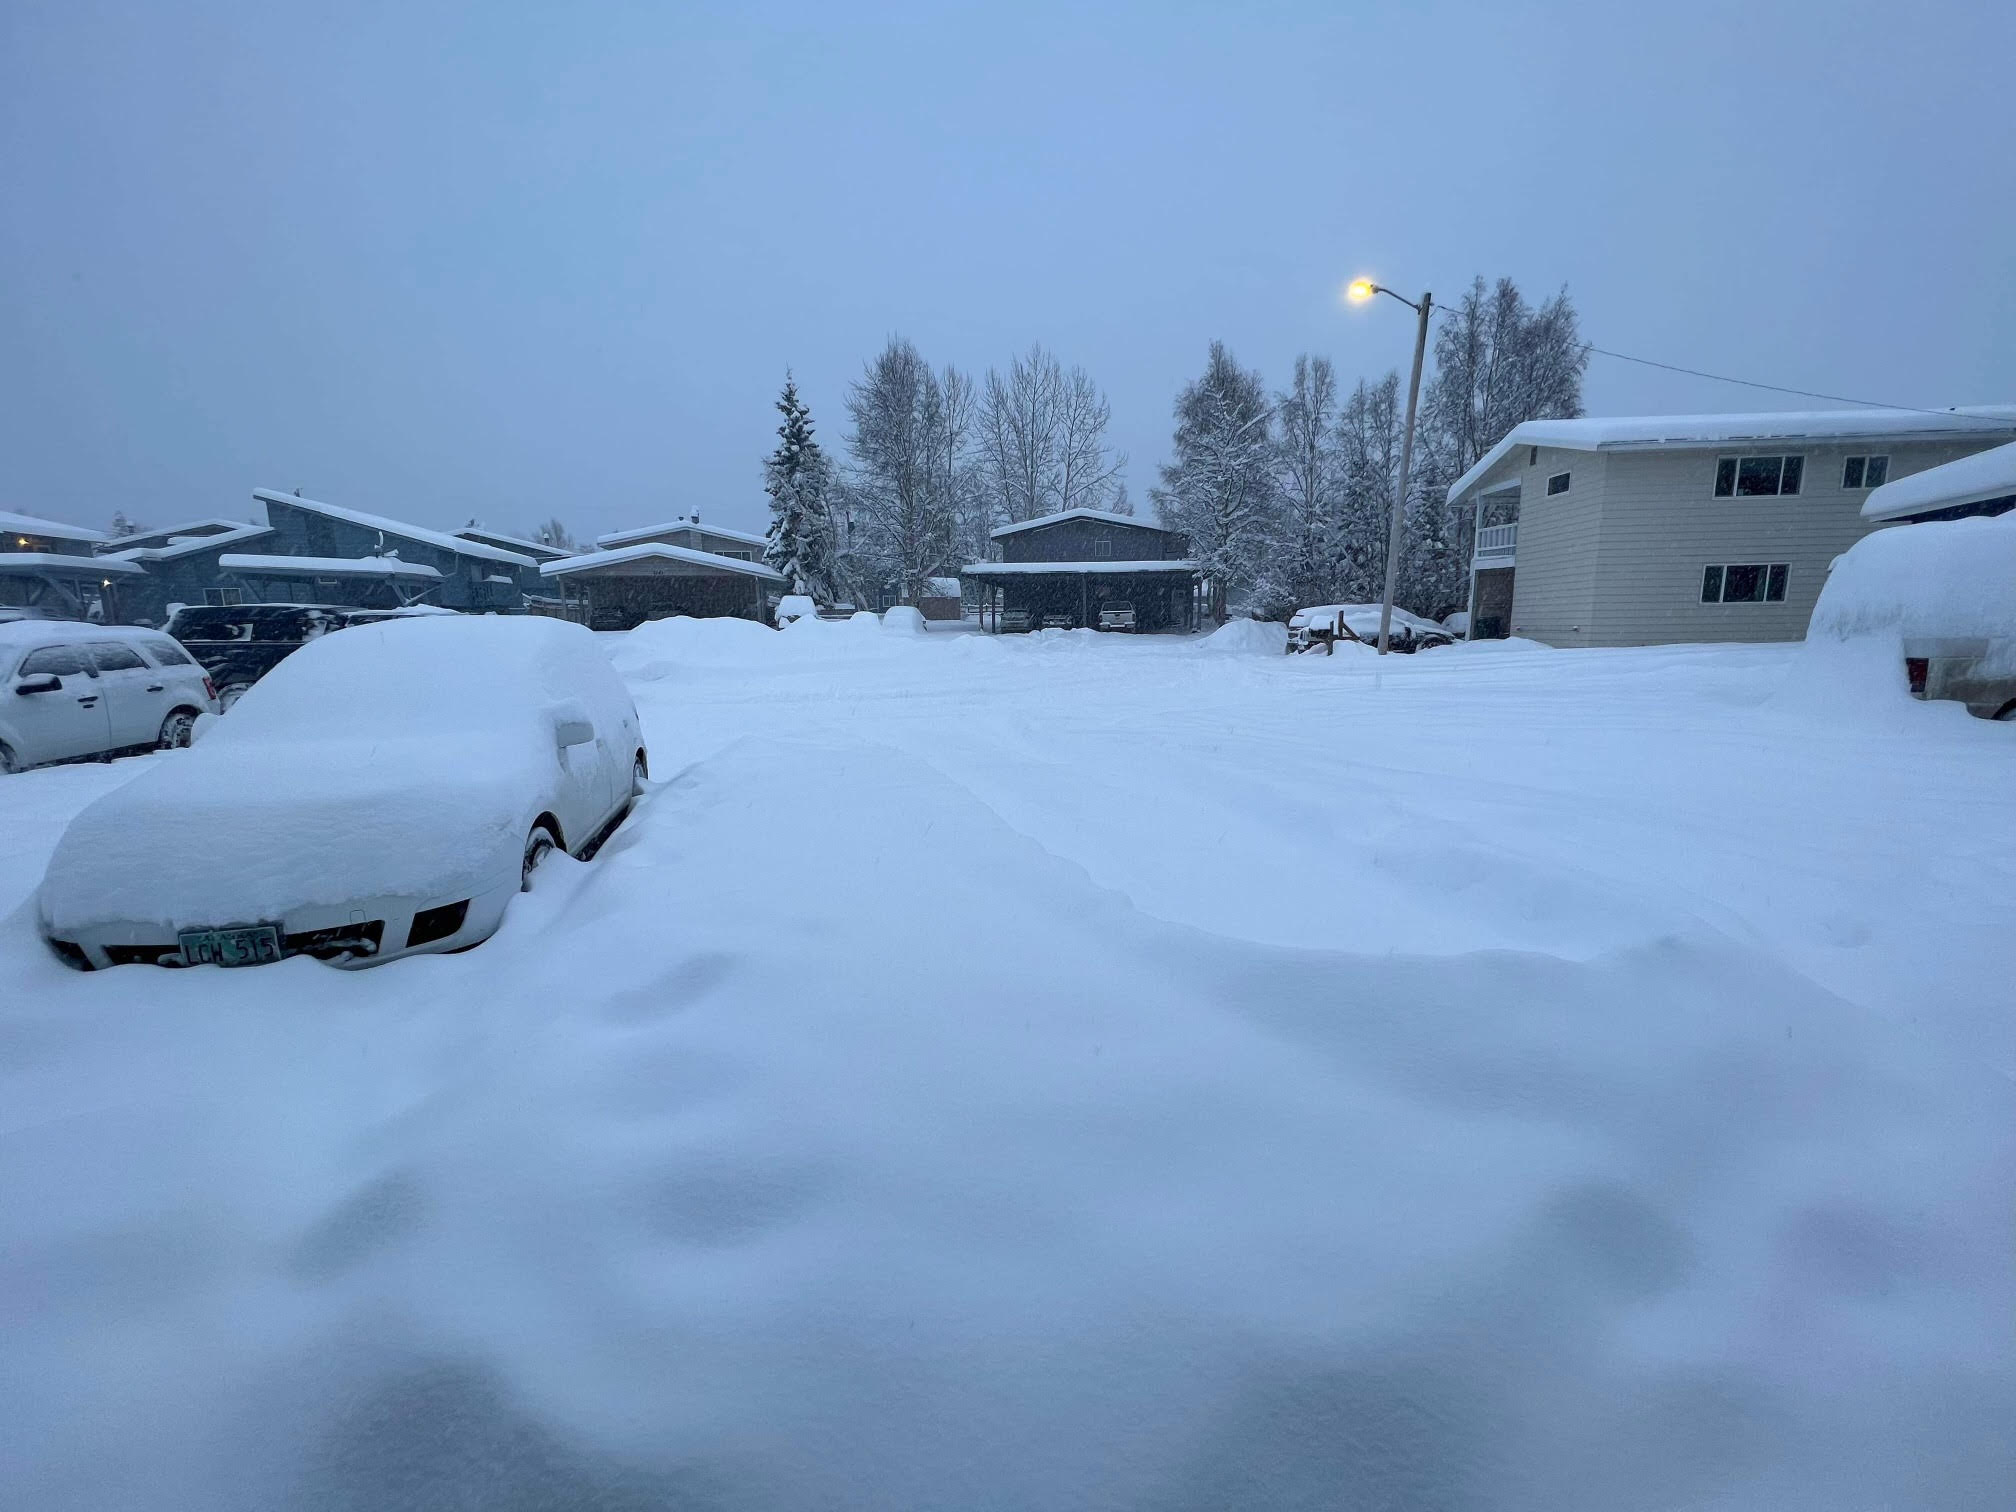 Thousands of Filipinos are affected by the record-breaking snow and intense cold currently experienced in Alaska.